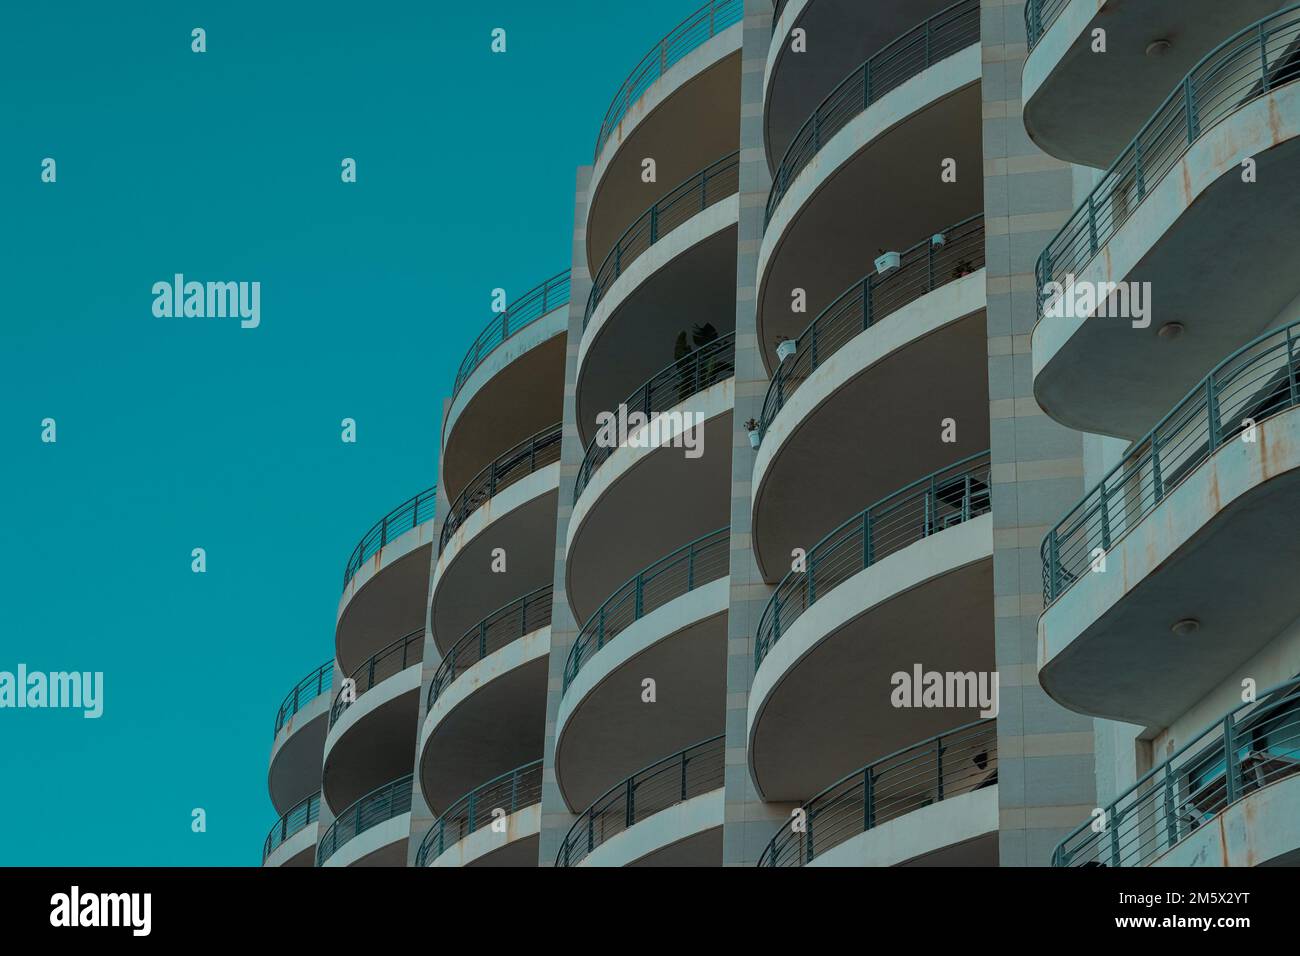 Interesting arhitectural round elements of building or hotel. Multiple balconies forming an interesting view. Stock Photo